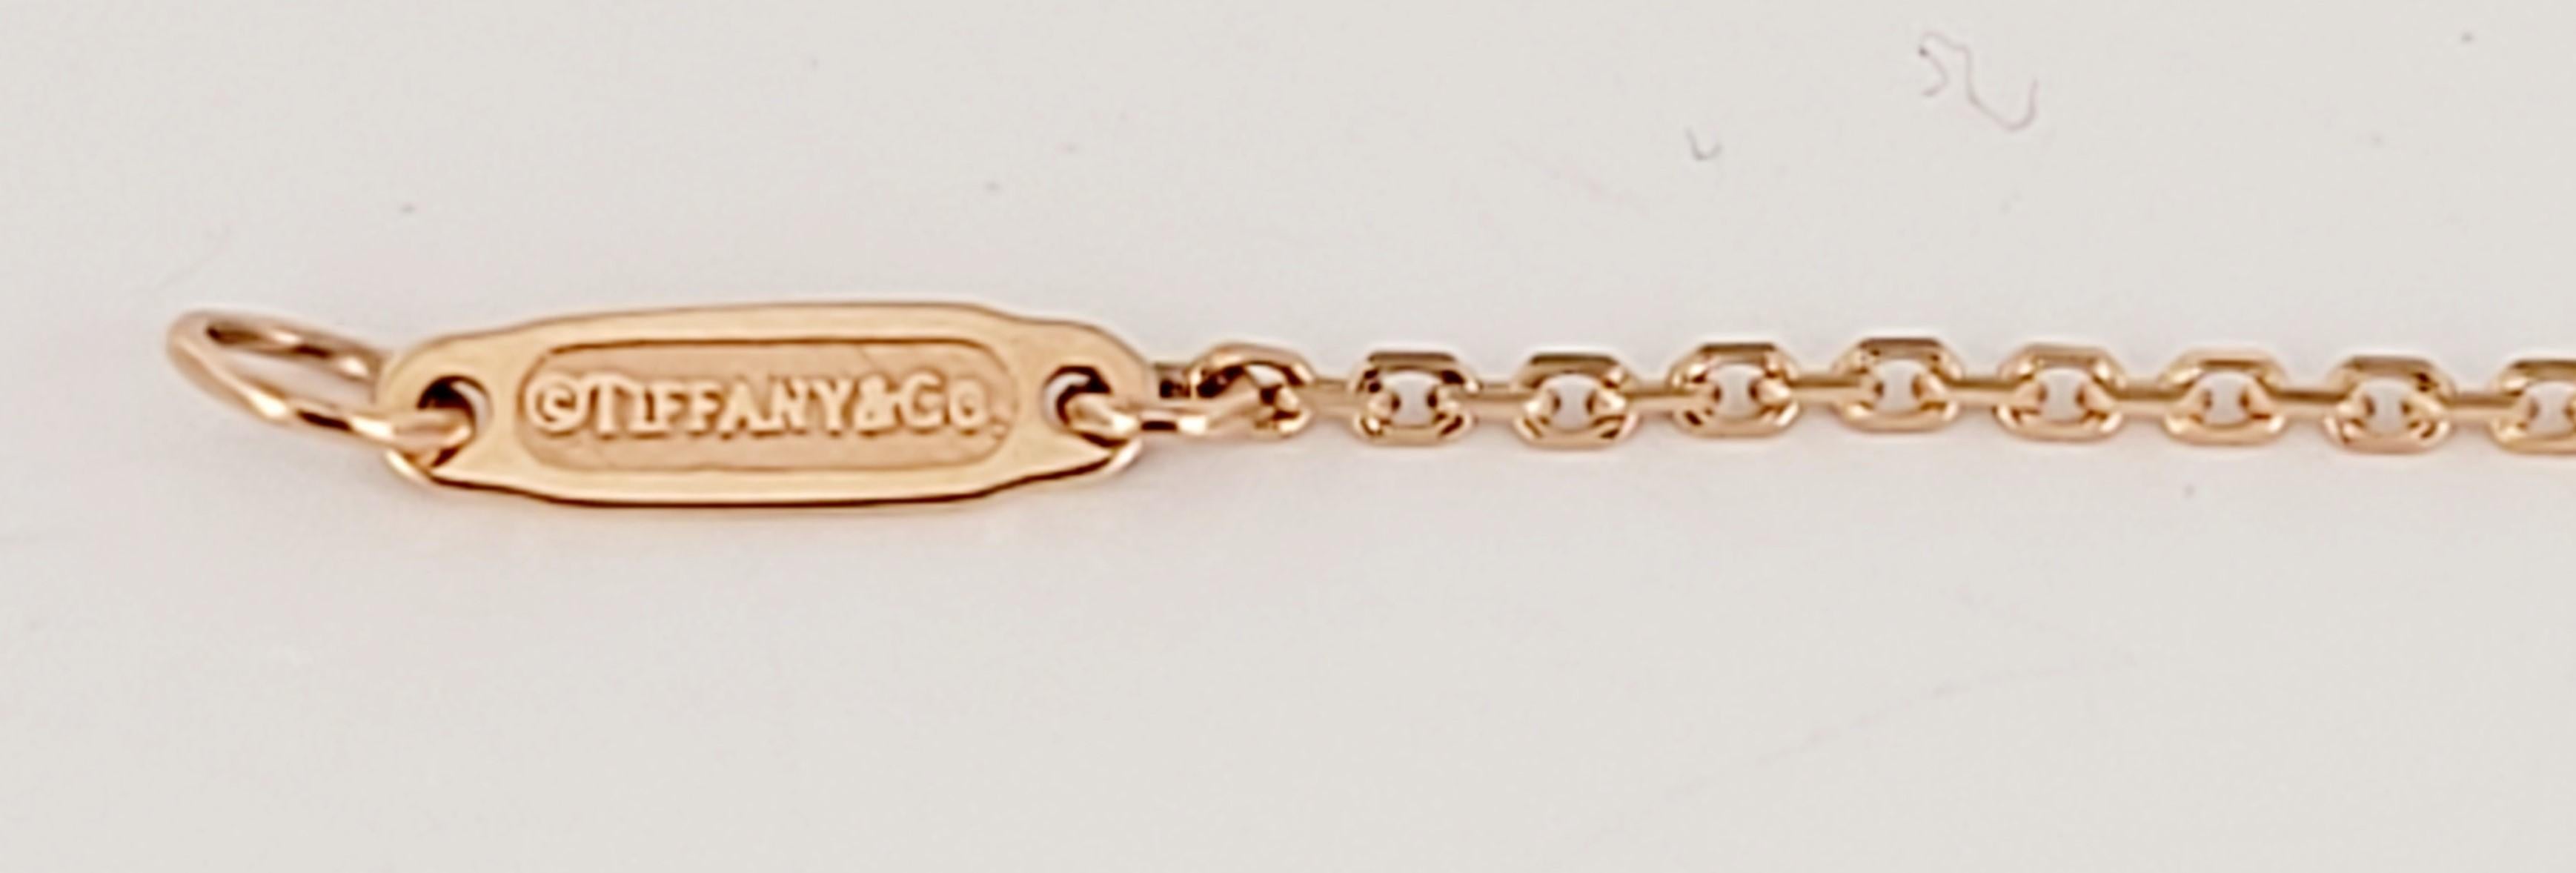 Brand Tiffany & Co 
Material 18K Rose Gold
Chain length 20''Long
Chain is not adjustable 
Weight 2.2gr
Gender Unisex
Condition New , never worn
Comes with Tiffany & Co pouch